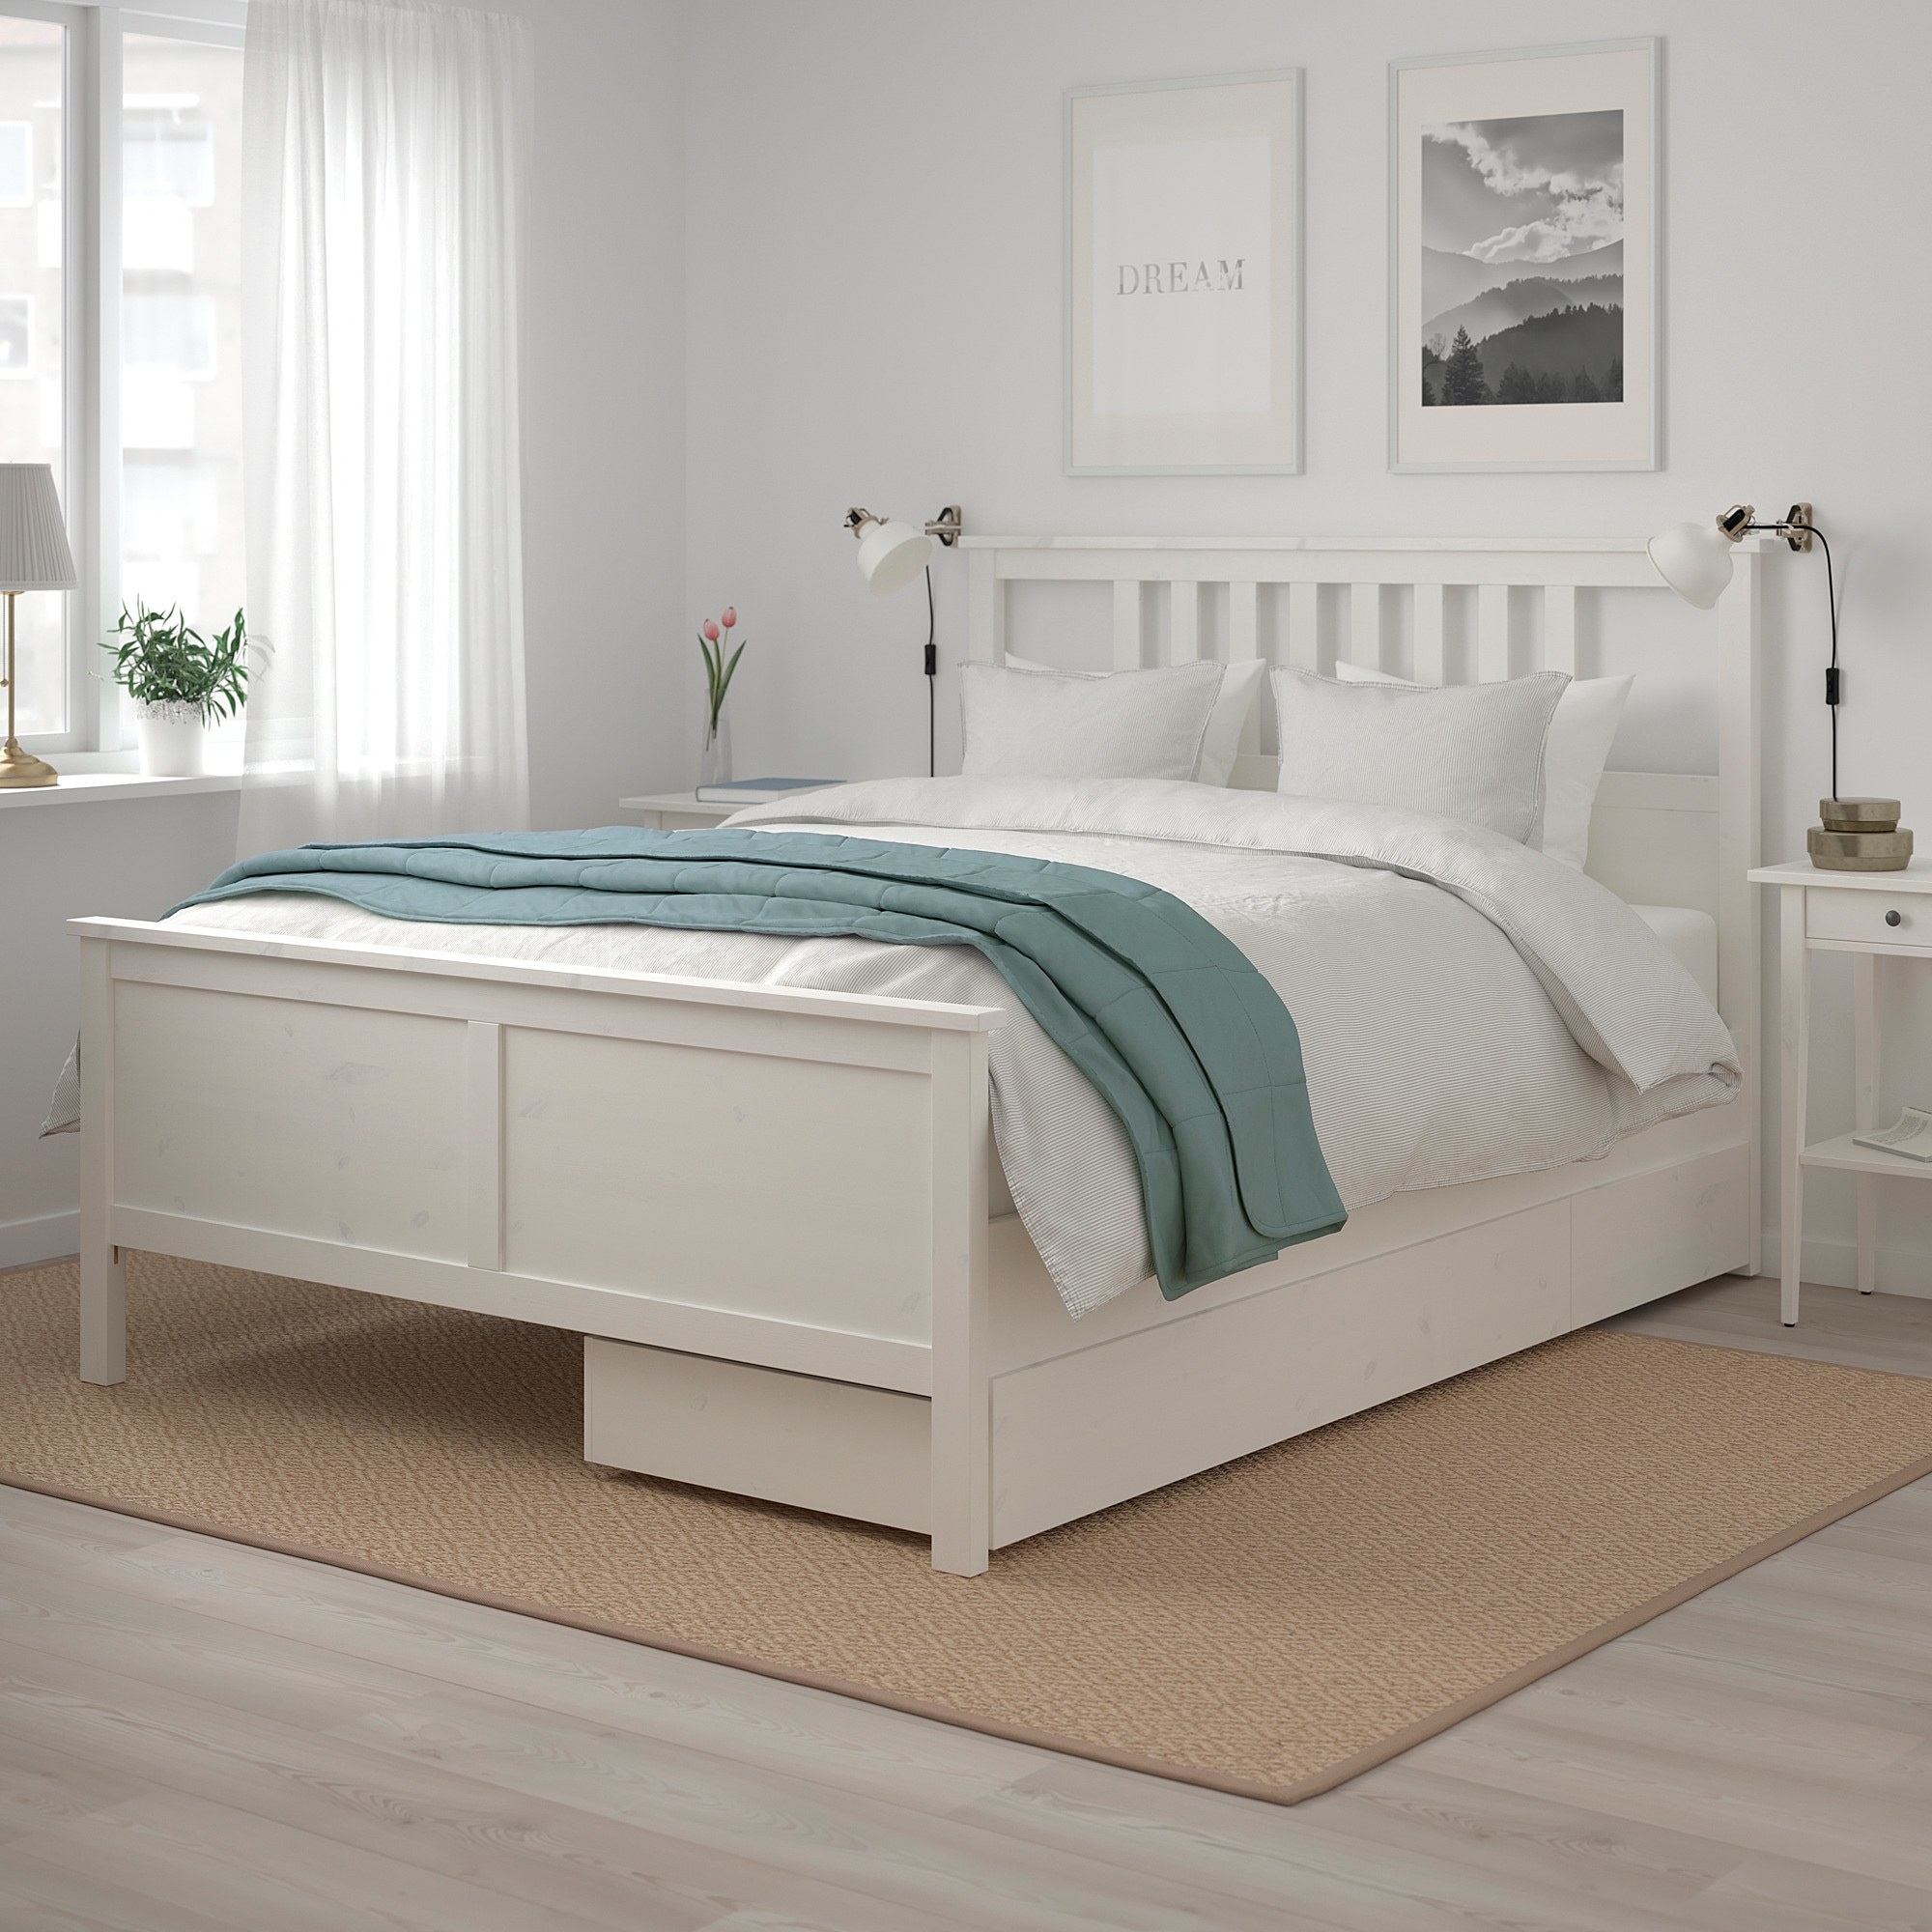 27 Bed Frames That Only Look, Bed Frame Cost